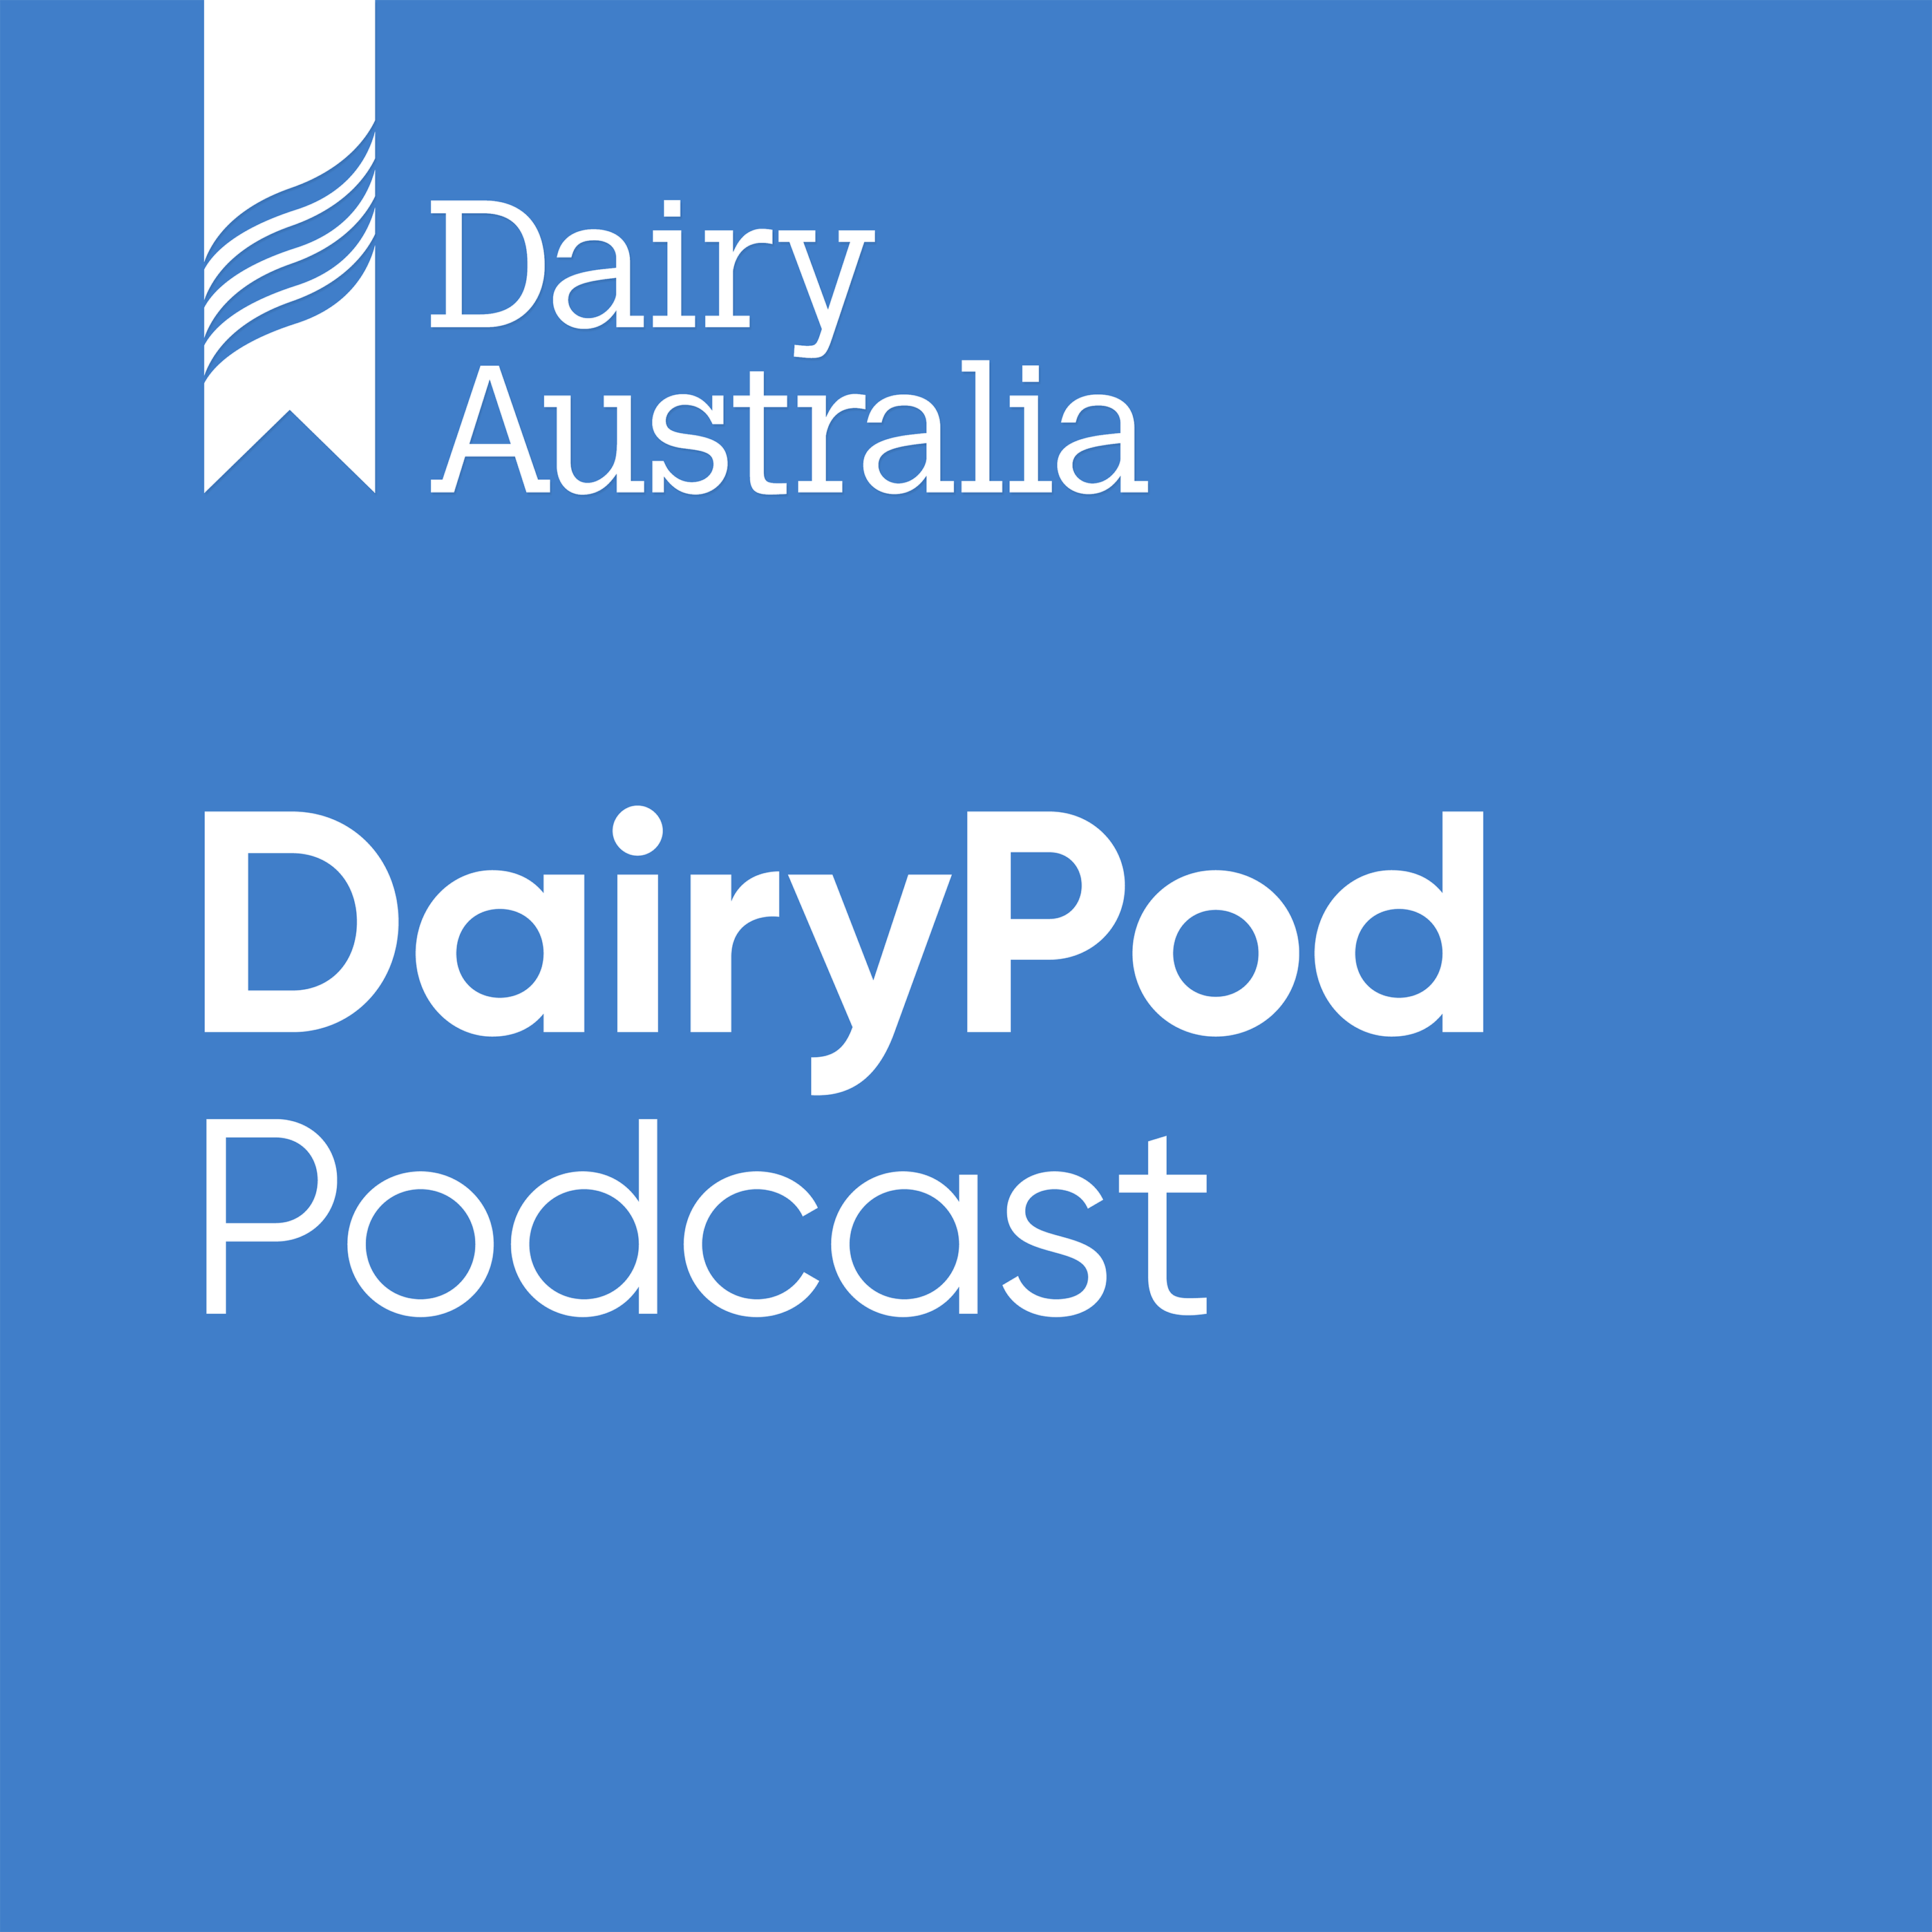 The importance of promoting the dairy industry